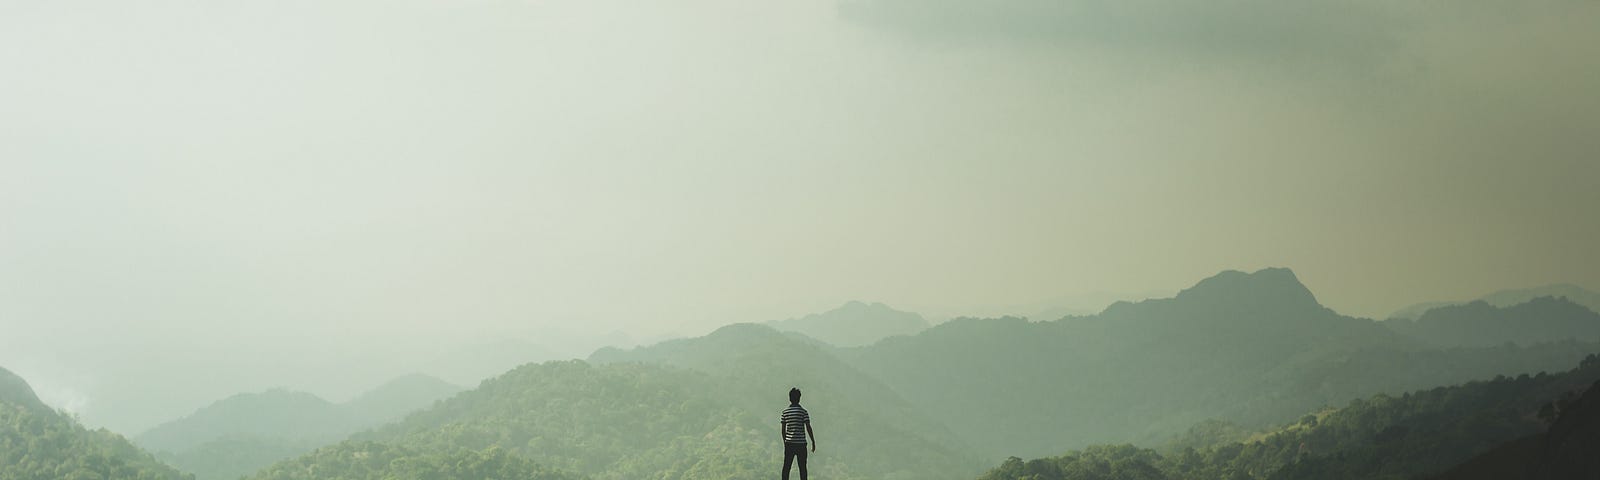 An image of someone standing atop a mountain, looking over a vast landscape, symbolizing the journey to success.